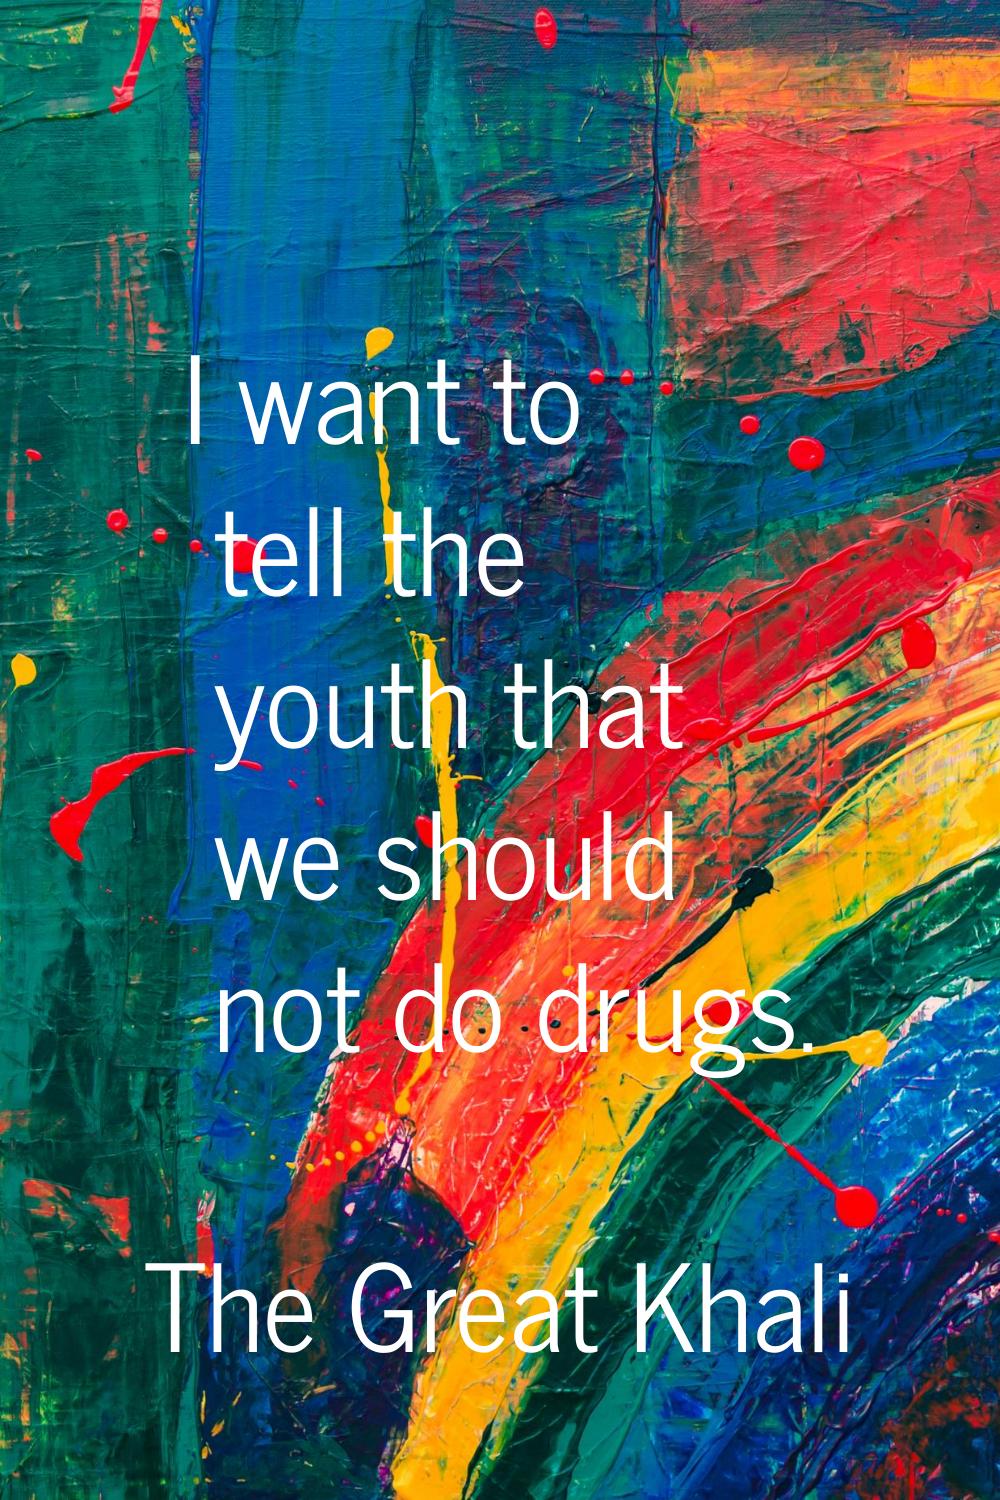 I want to tell the youth that we should not do drugs.